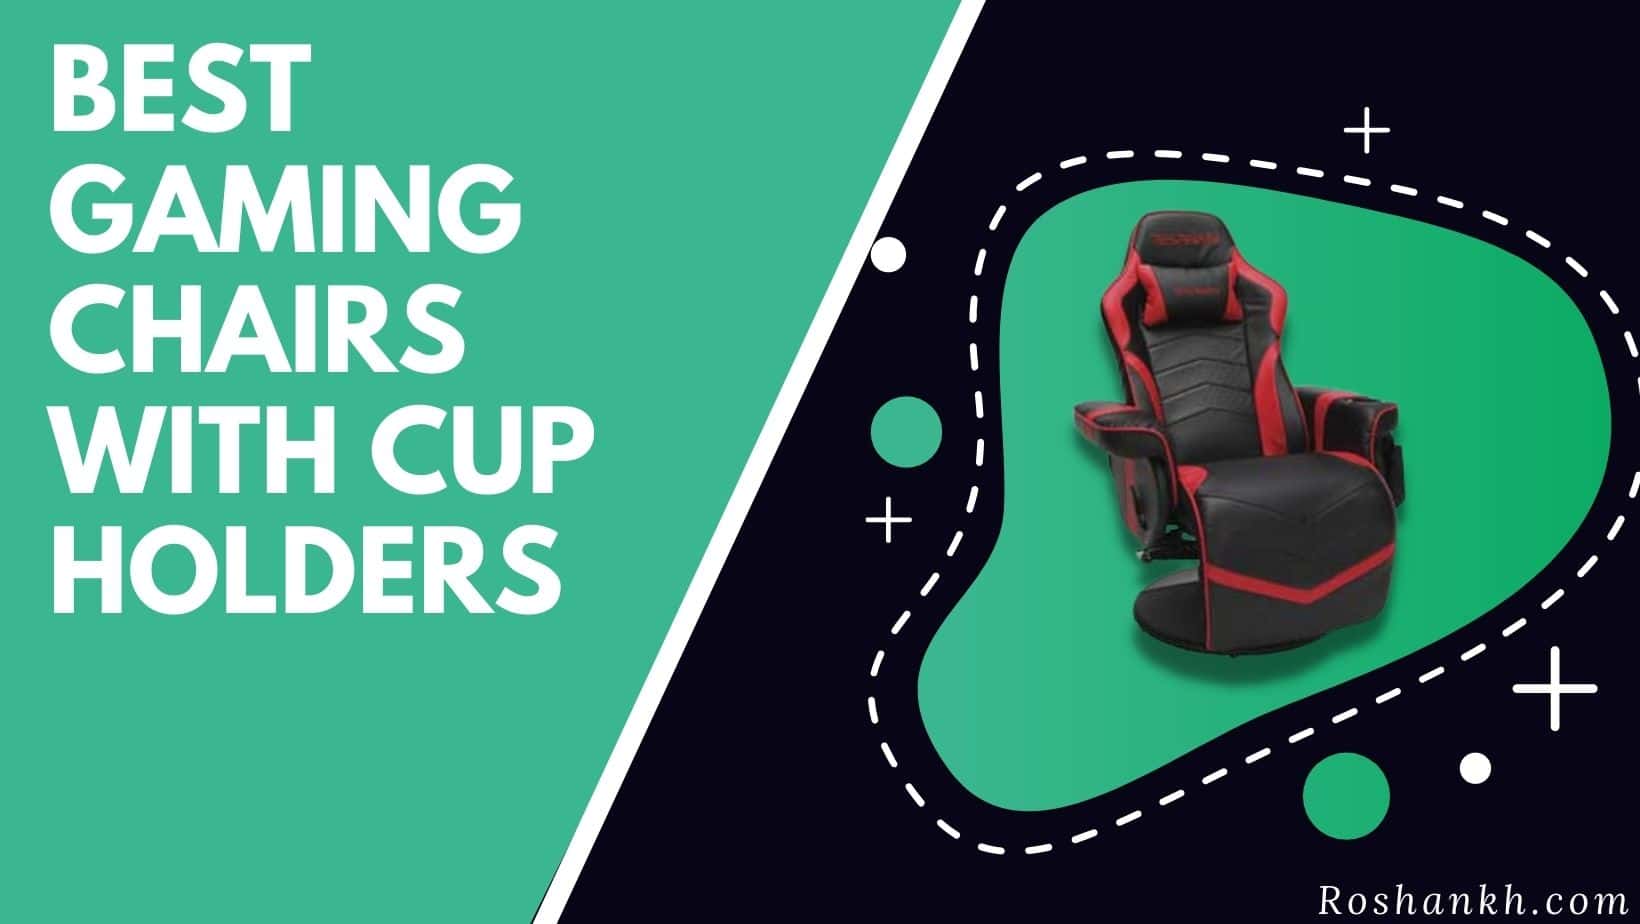 Best Gaming Chairs with Cup Holders